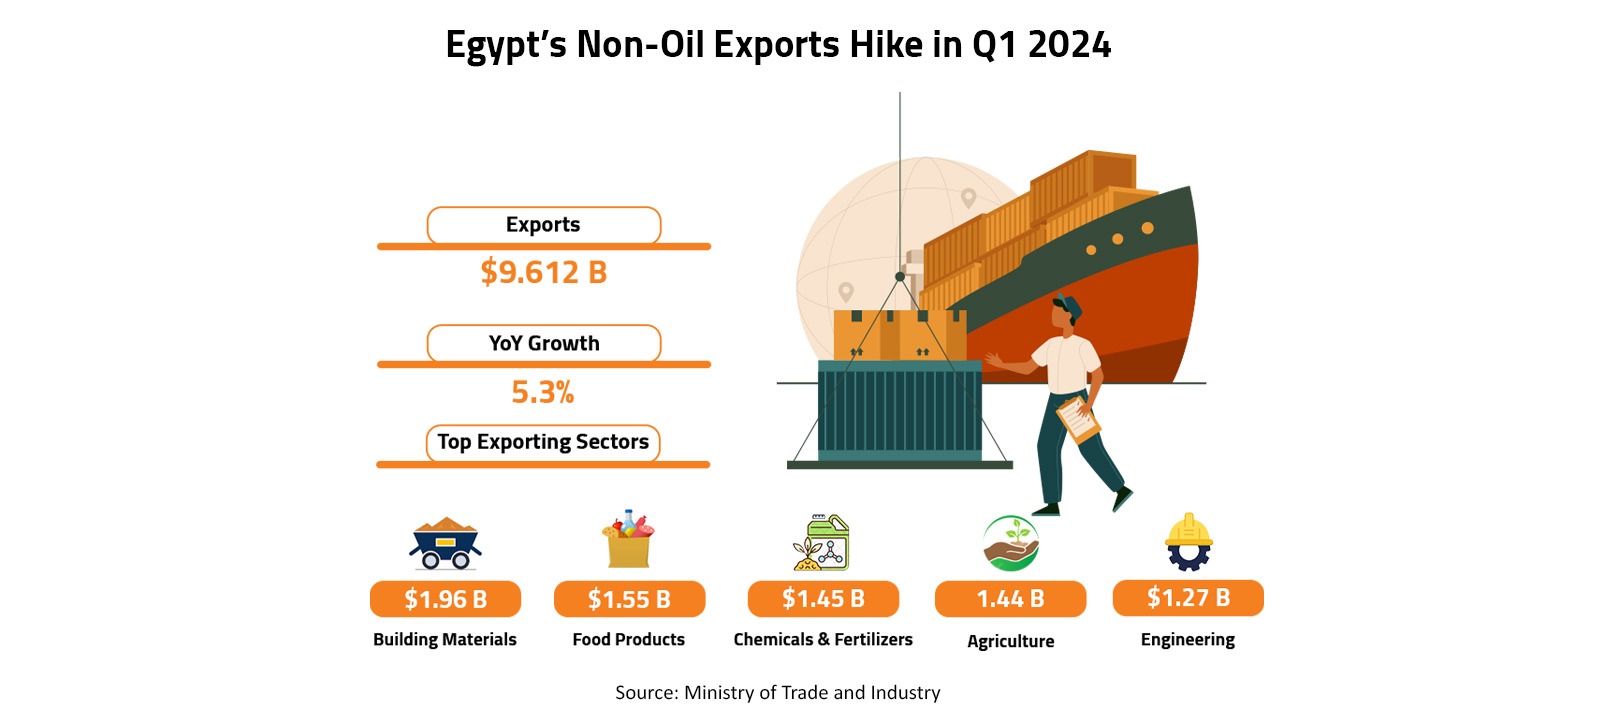 Egypt’s Non-Oil Exports Hike in Q1 2024